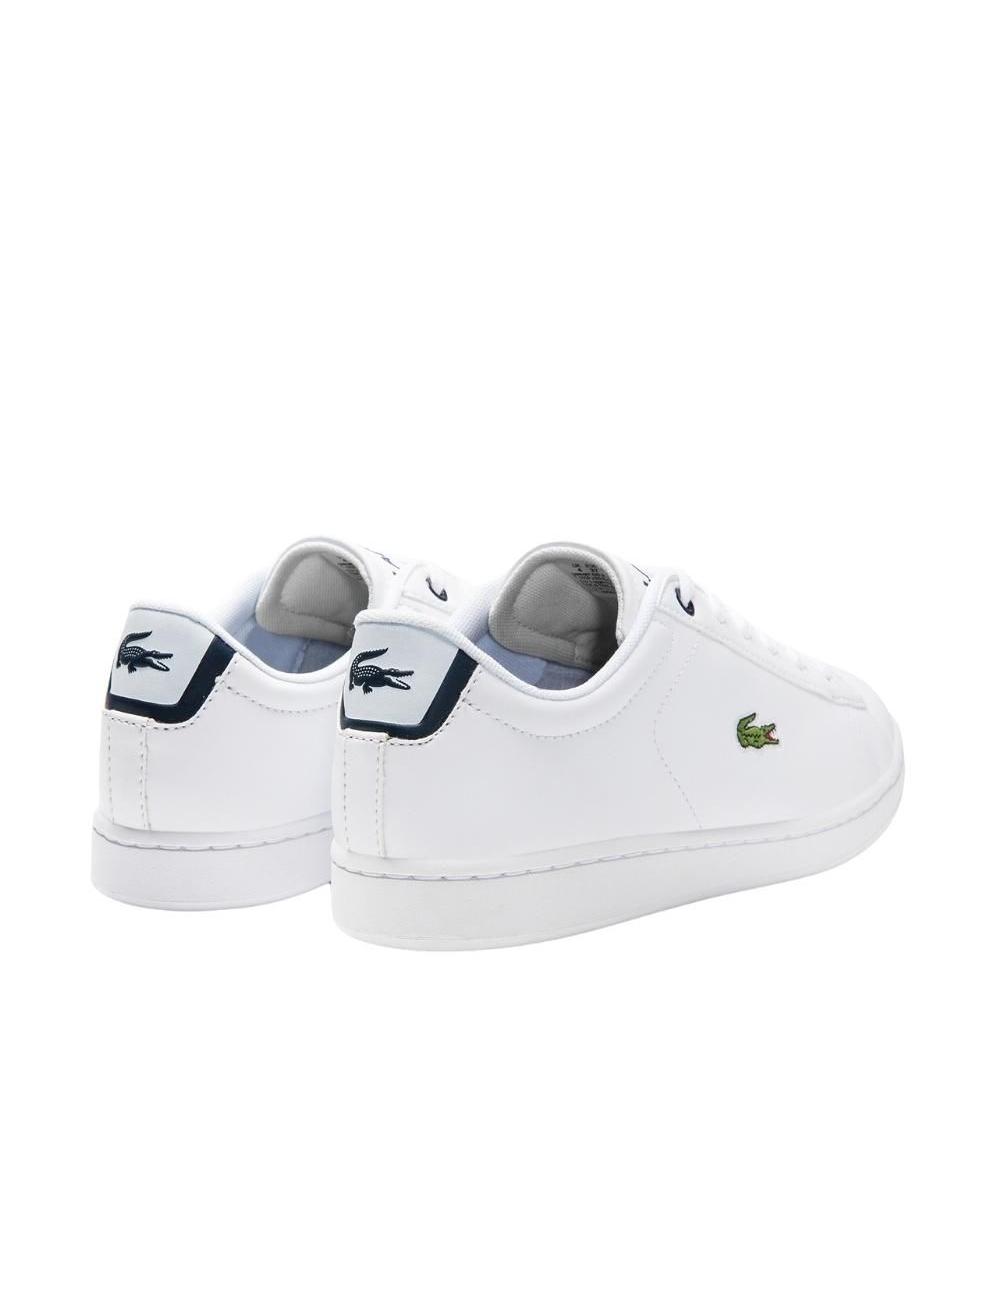 LACOSTE DEPORTIVO CARNABY MUJER